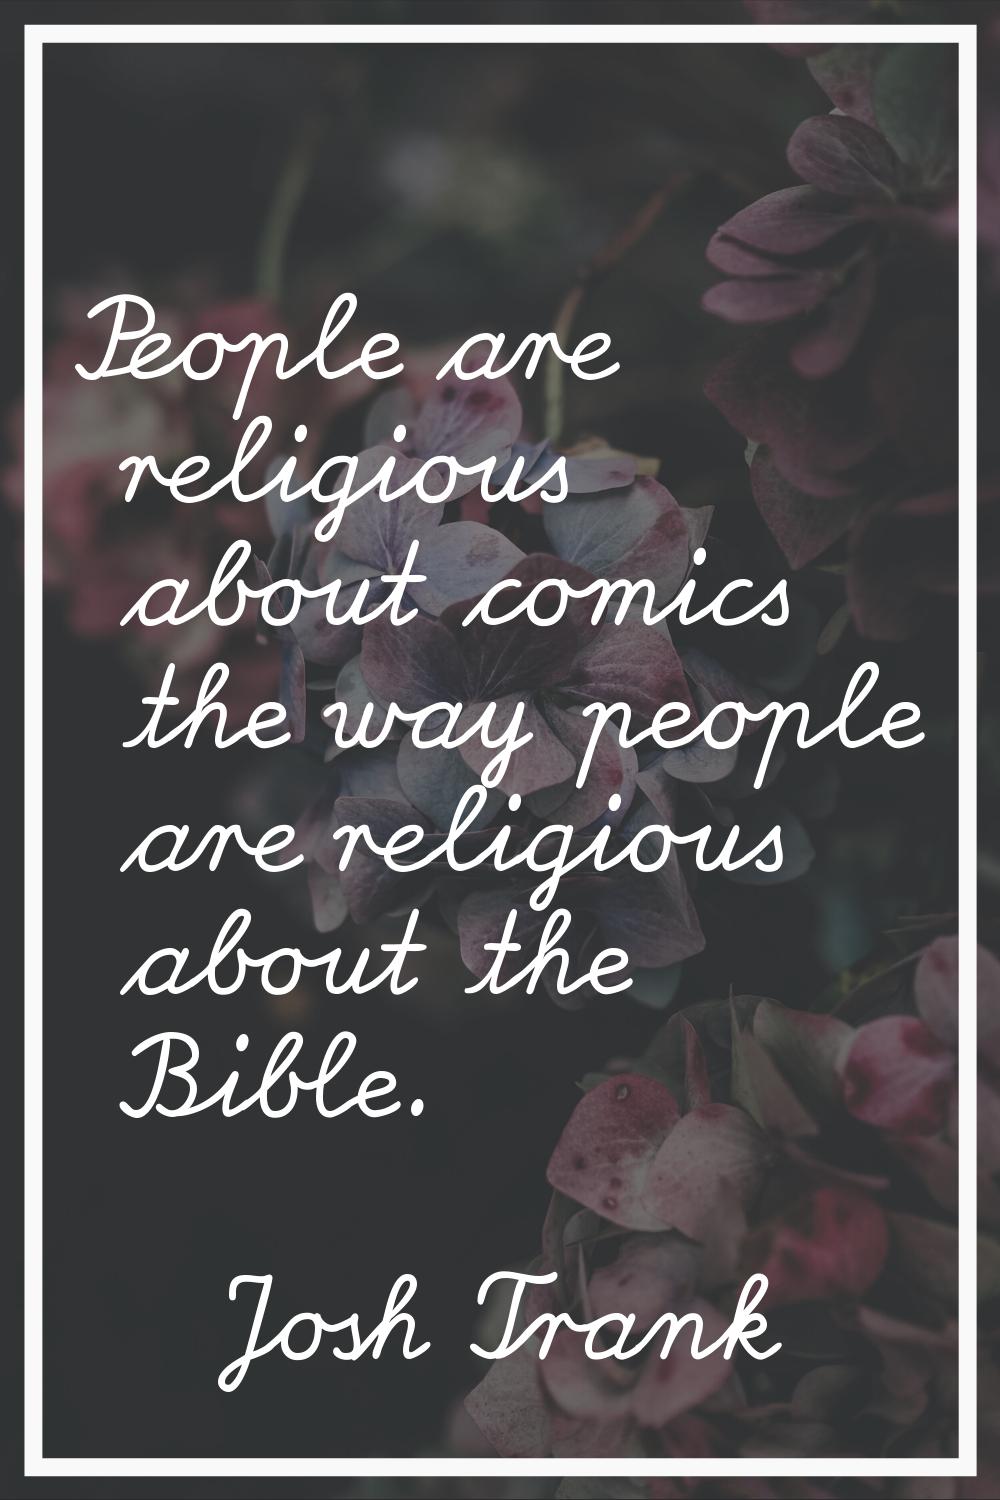 People are religious about comics the way people are religious about the Bible.